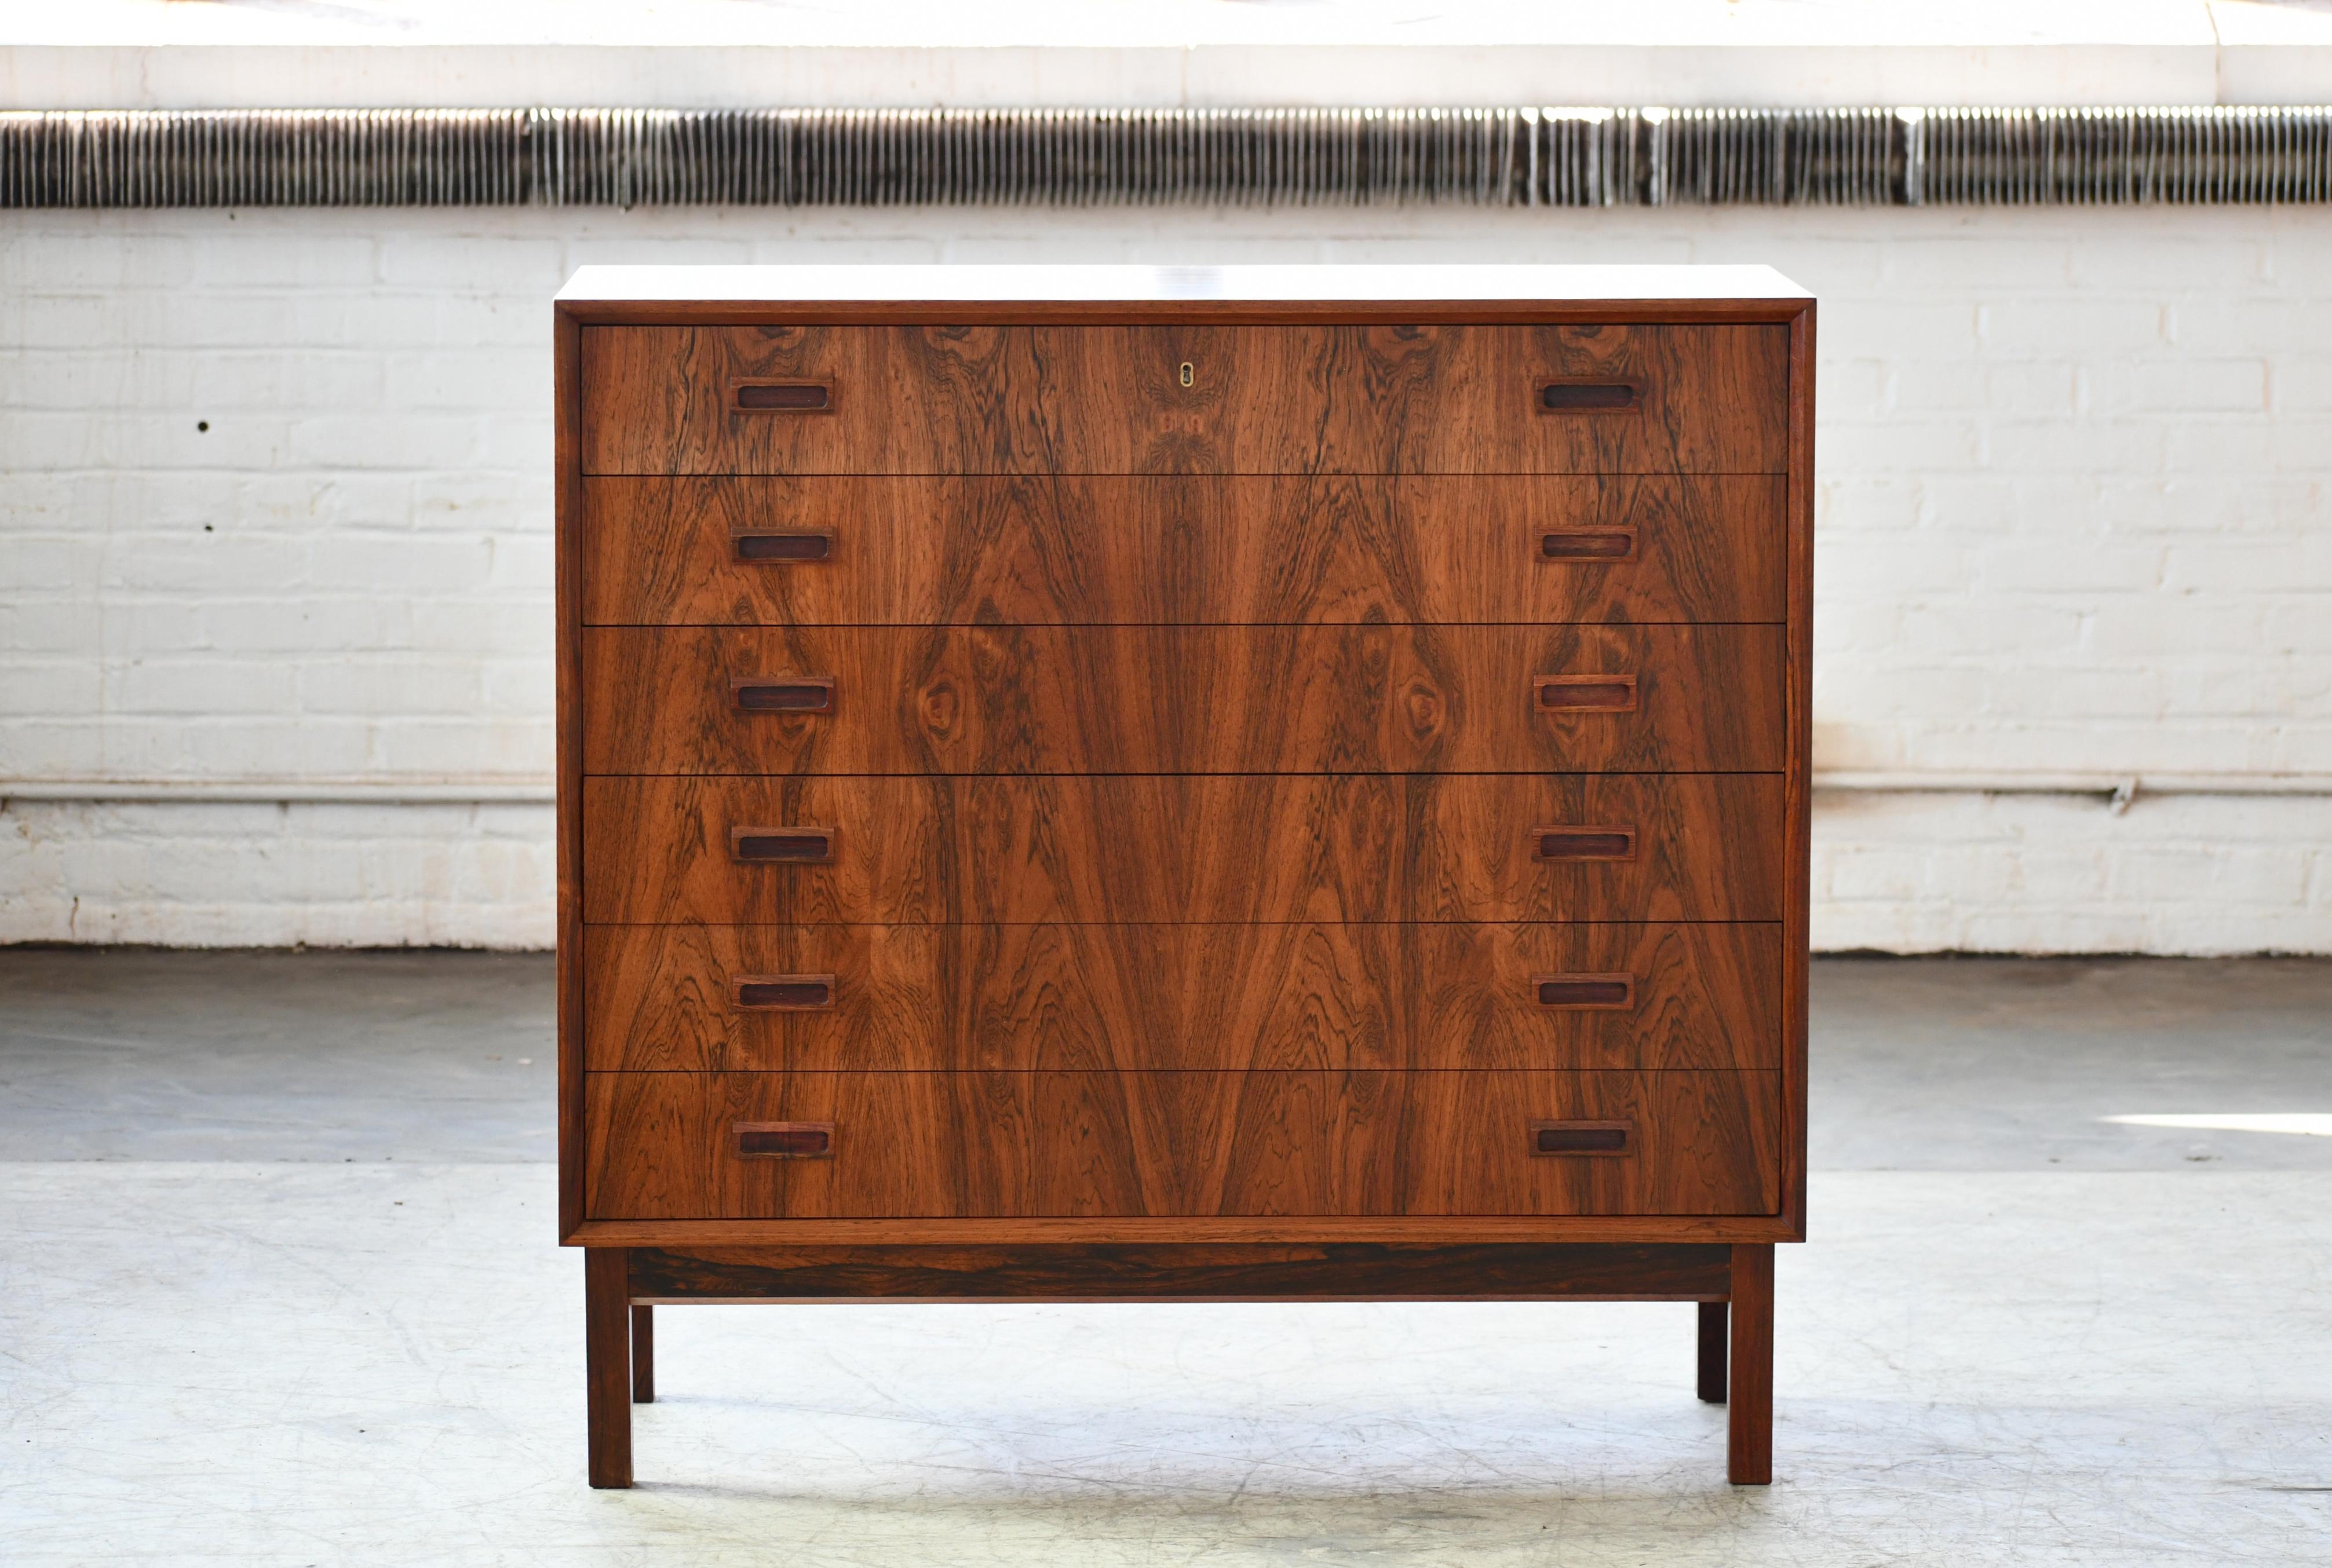 Exquisite 1960s rosewood chest of drawers with six large drawers in book matched rosewood veneer. Highest quality craftmanship with solid edges and carved drawer pulls. Beautiful deep color and grain. Raised on a base of solid rosewood. Designed by